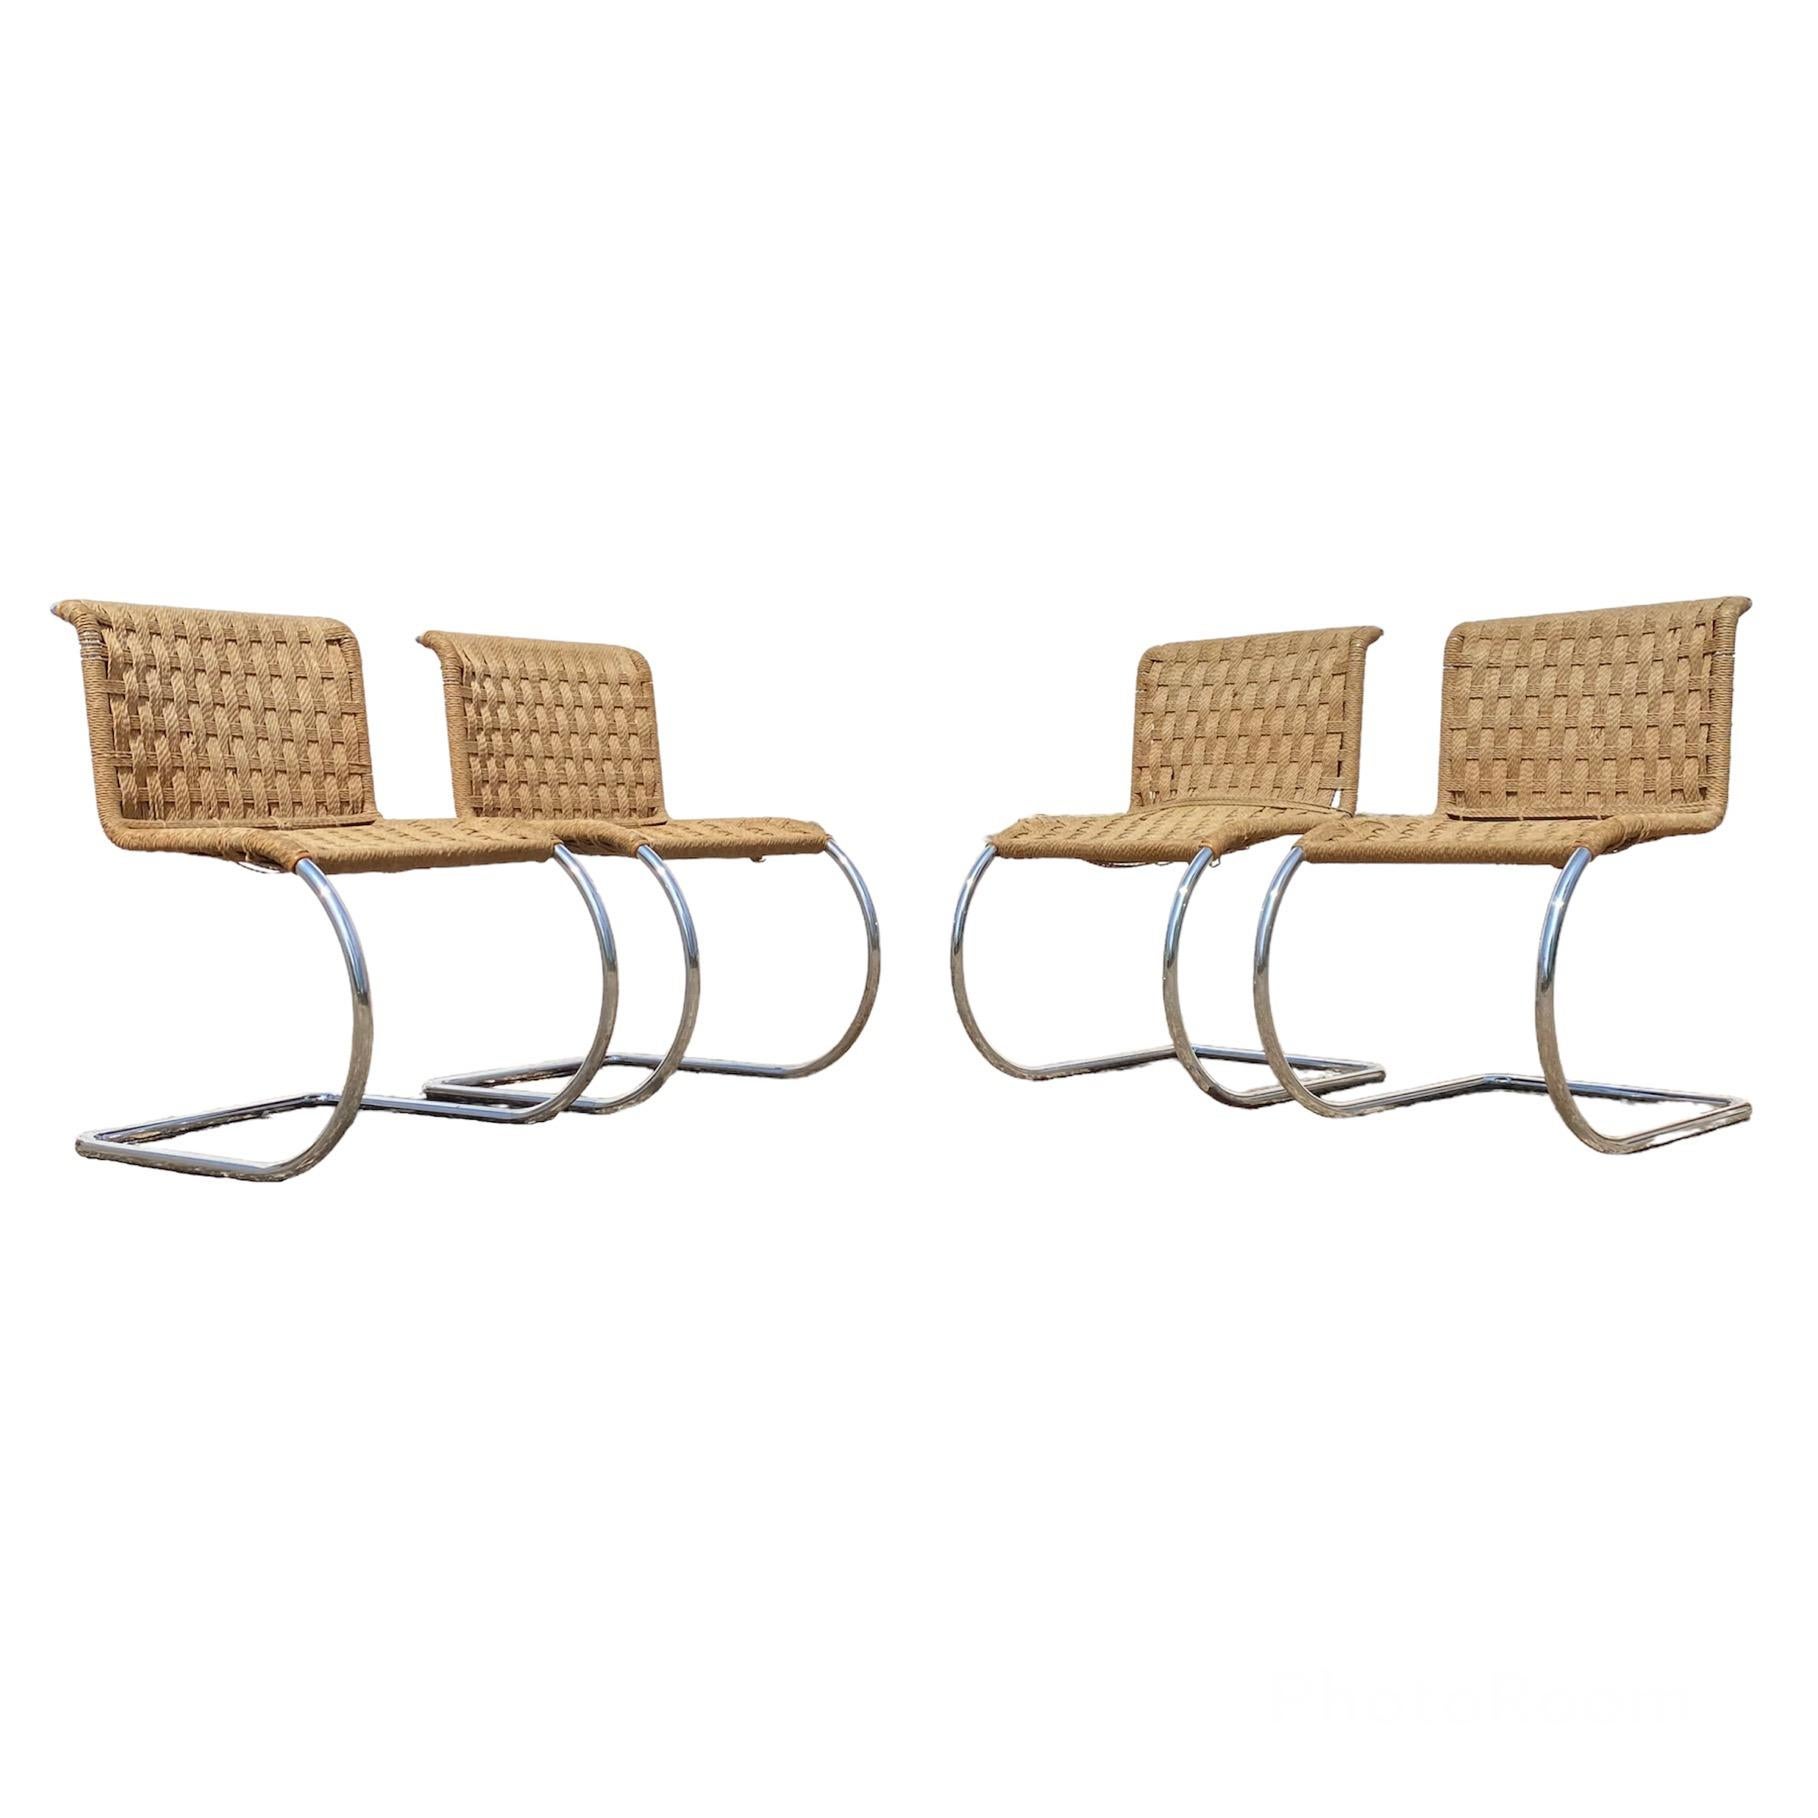 Original MR10 Chairs designed by Mies Van der Rohe, produced in the 1960's. 
 
The structure of the chairs is on good conditions.
 
Please note that the set could have some signs of age and use.
 
Dimensions:
H: 81cm
L: 49cm
D: 74cm
H